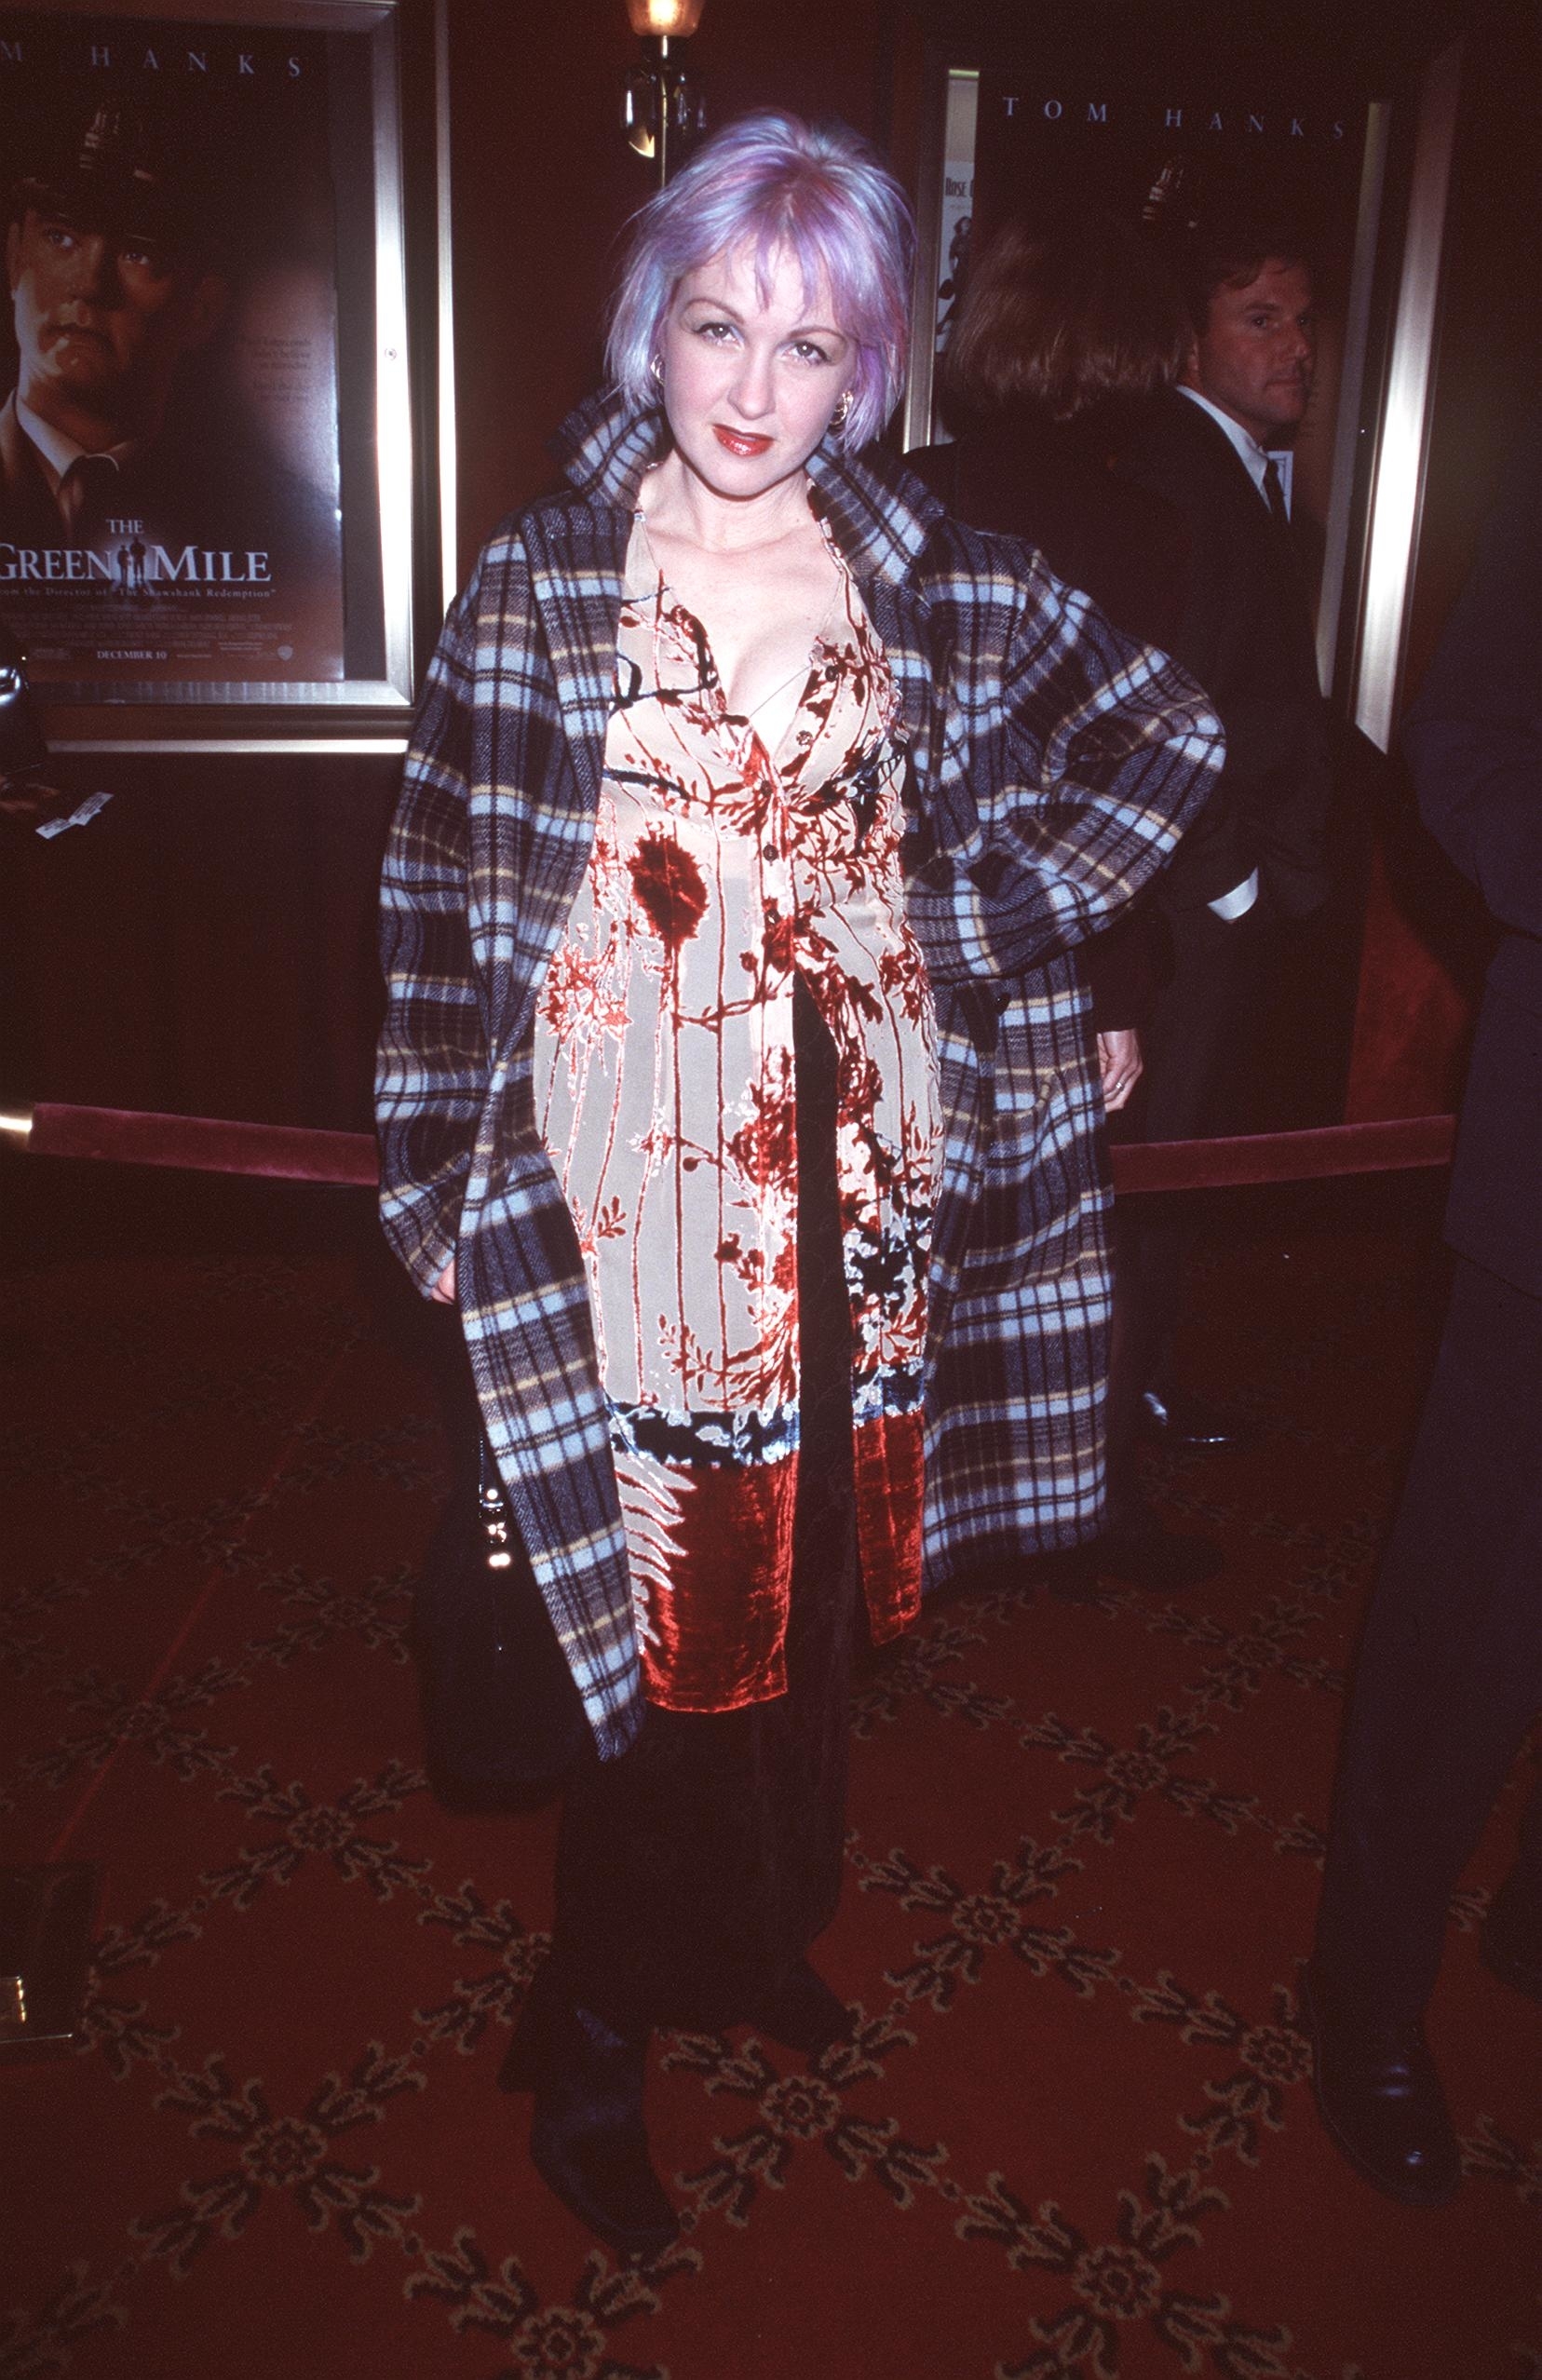 Cyndi on red carpet in plaid coat over patterned dress, standing near a movie poster